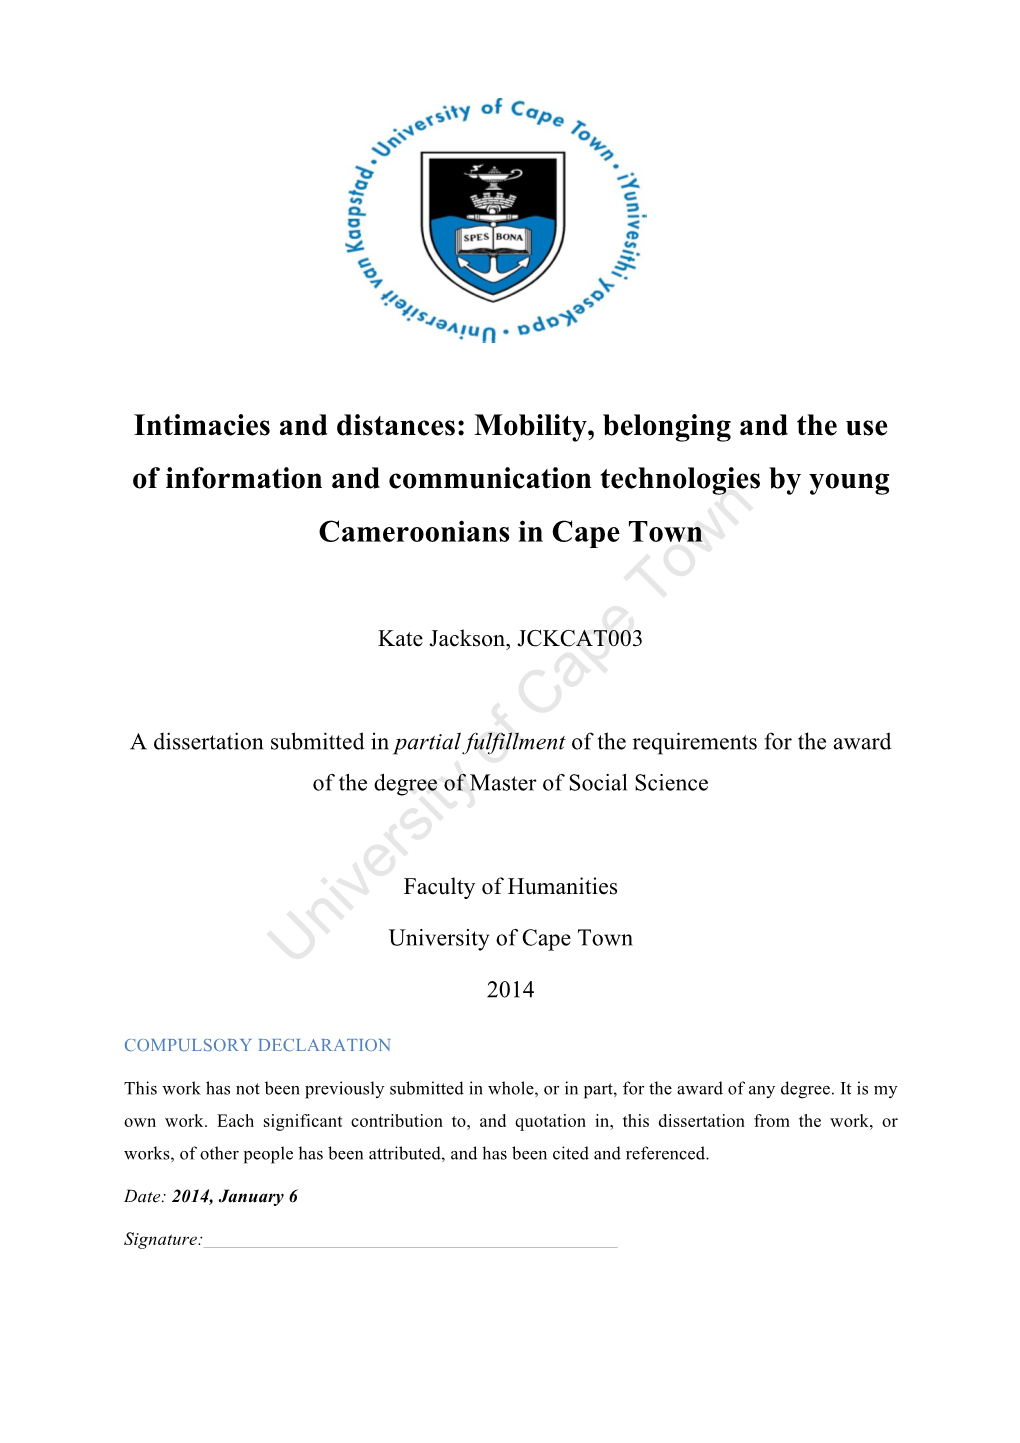 Mobility, Belonging and the Use of Information and Communication Technologies by Young Cameroonians in Cape Town